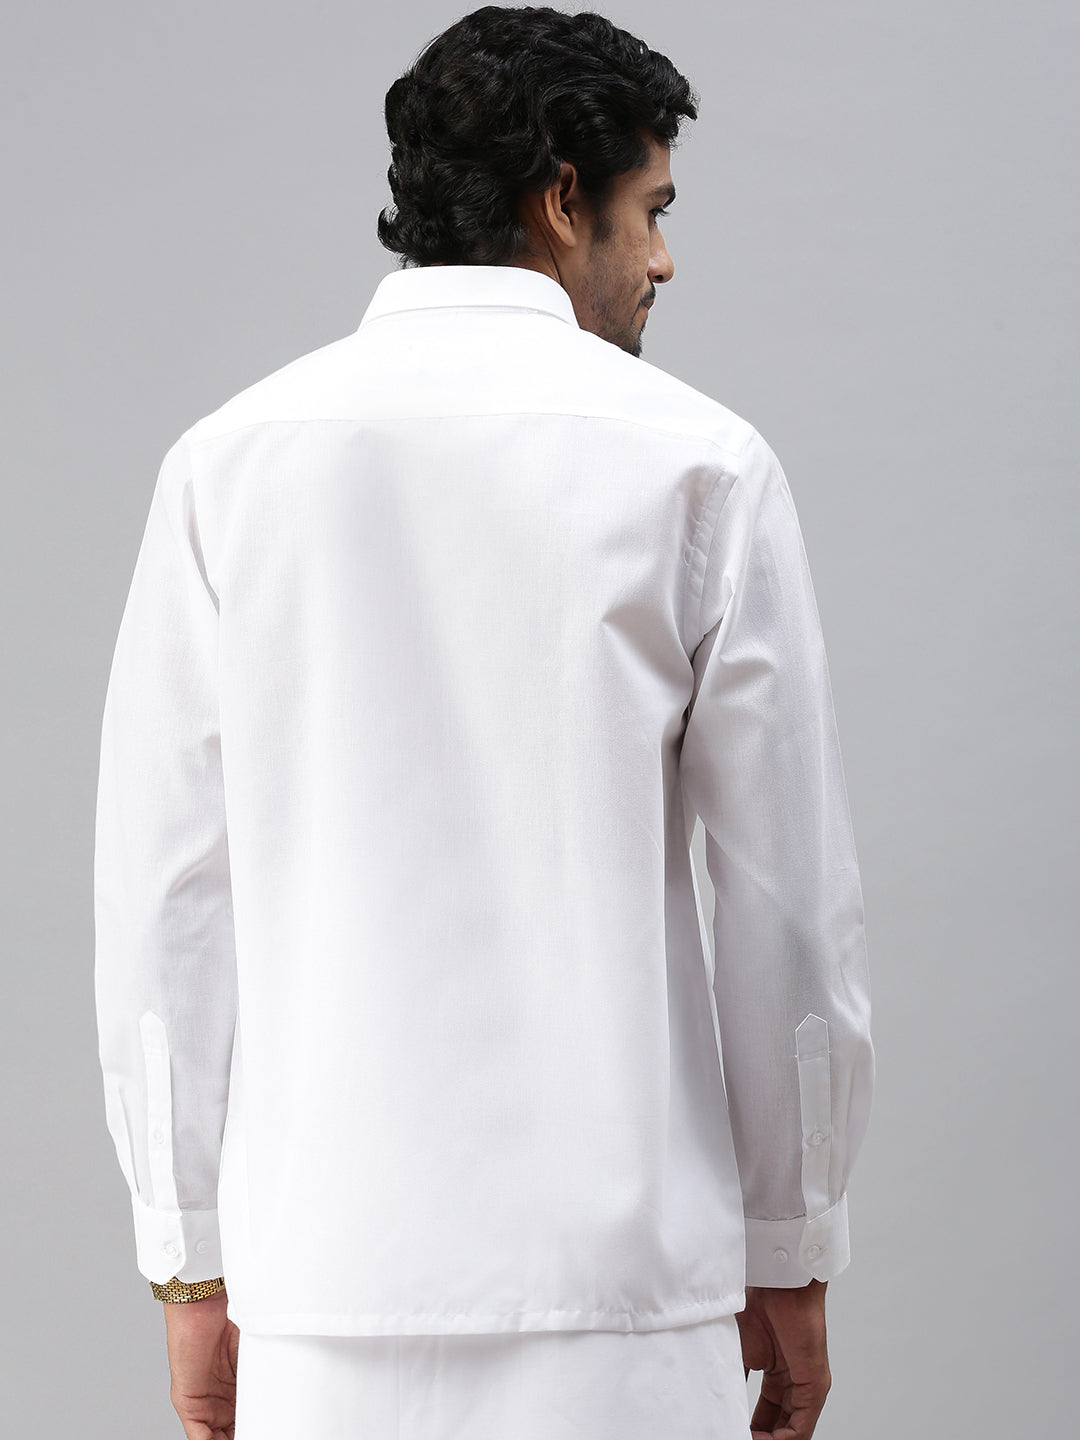 Mens Poly Cotton Full Sleeves Prestigious Fit White Shirt Minister-Back view